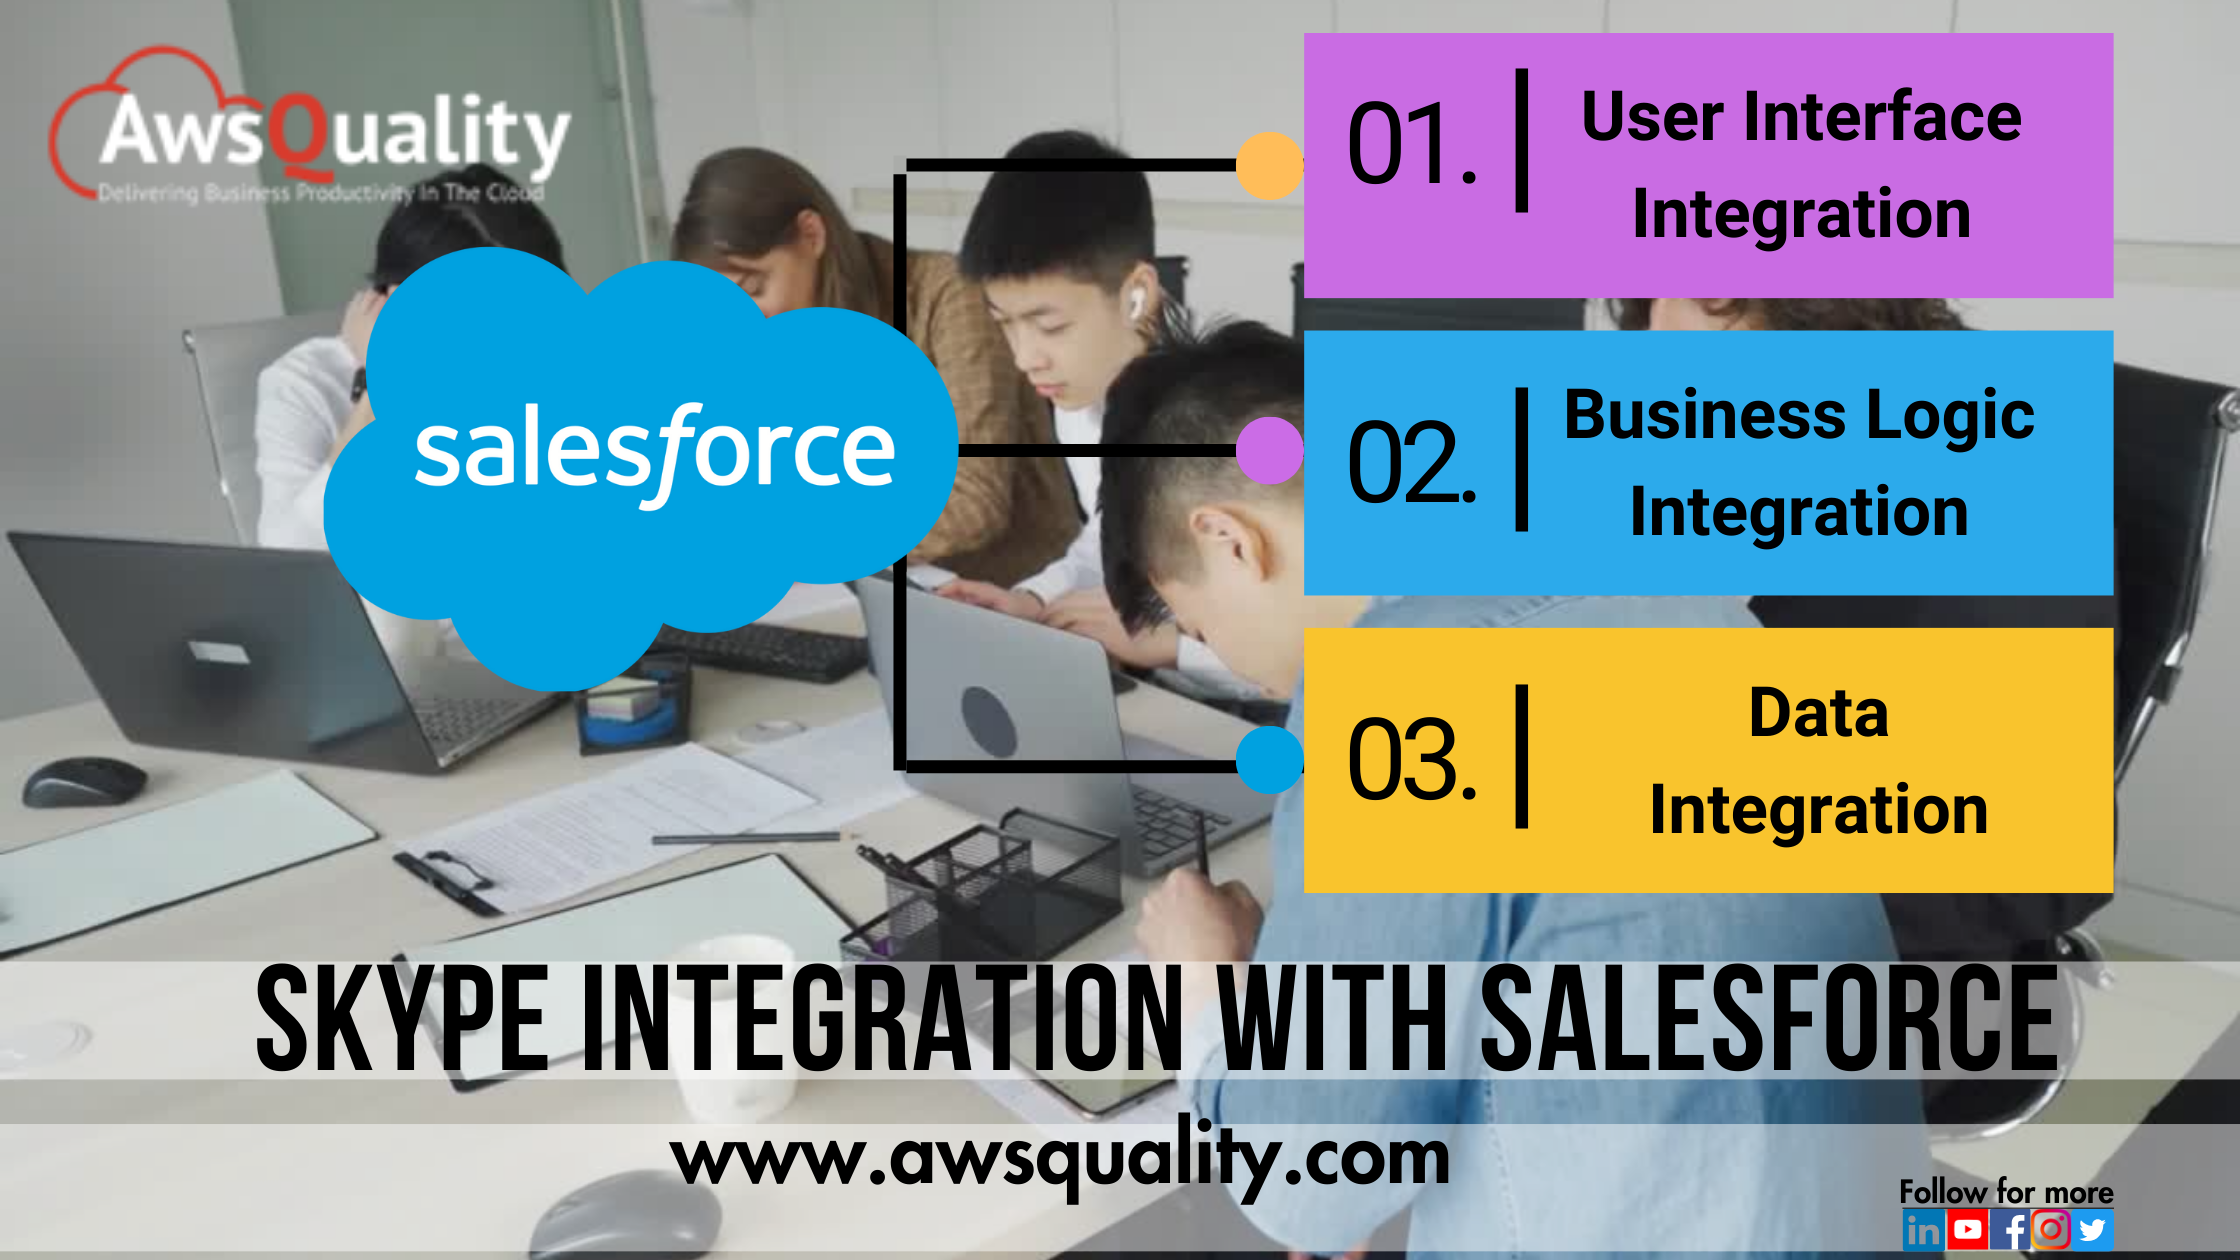 Skype Integration with Salesforce